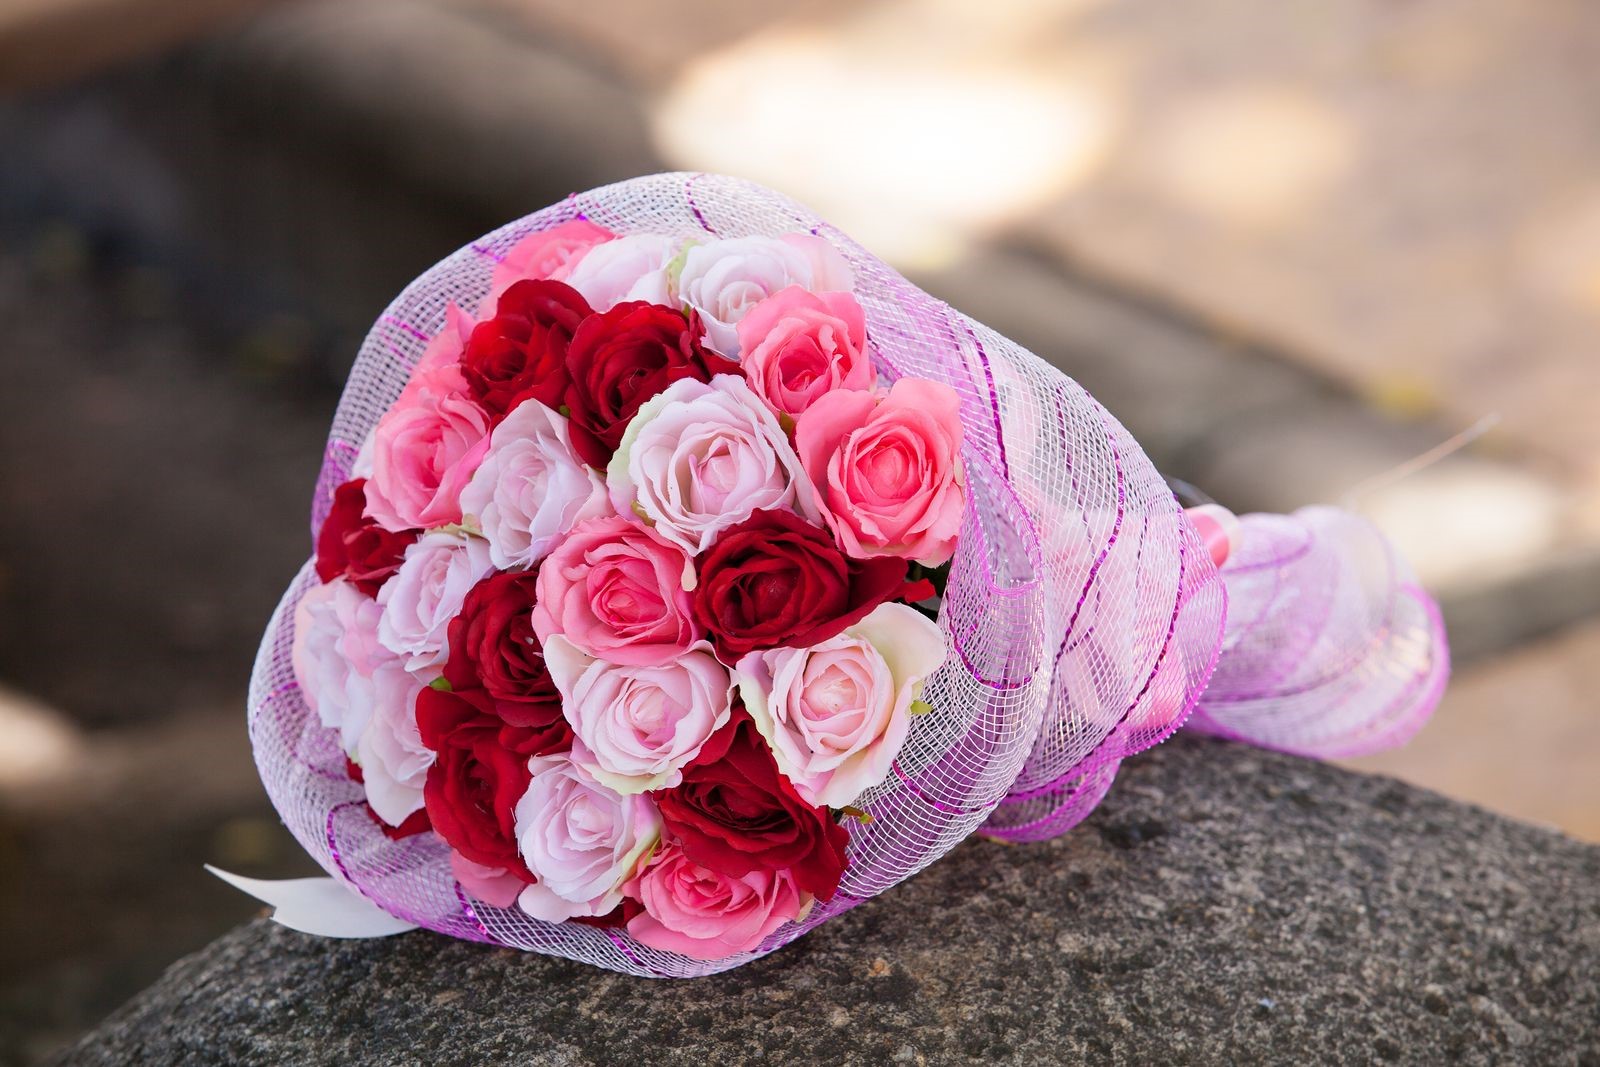 Flower Shops Name the Best Types of Bouquets to Give on Any Occasion